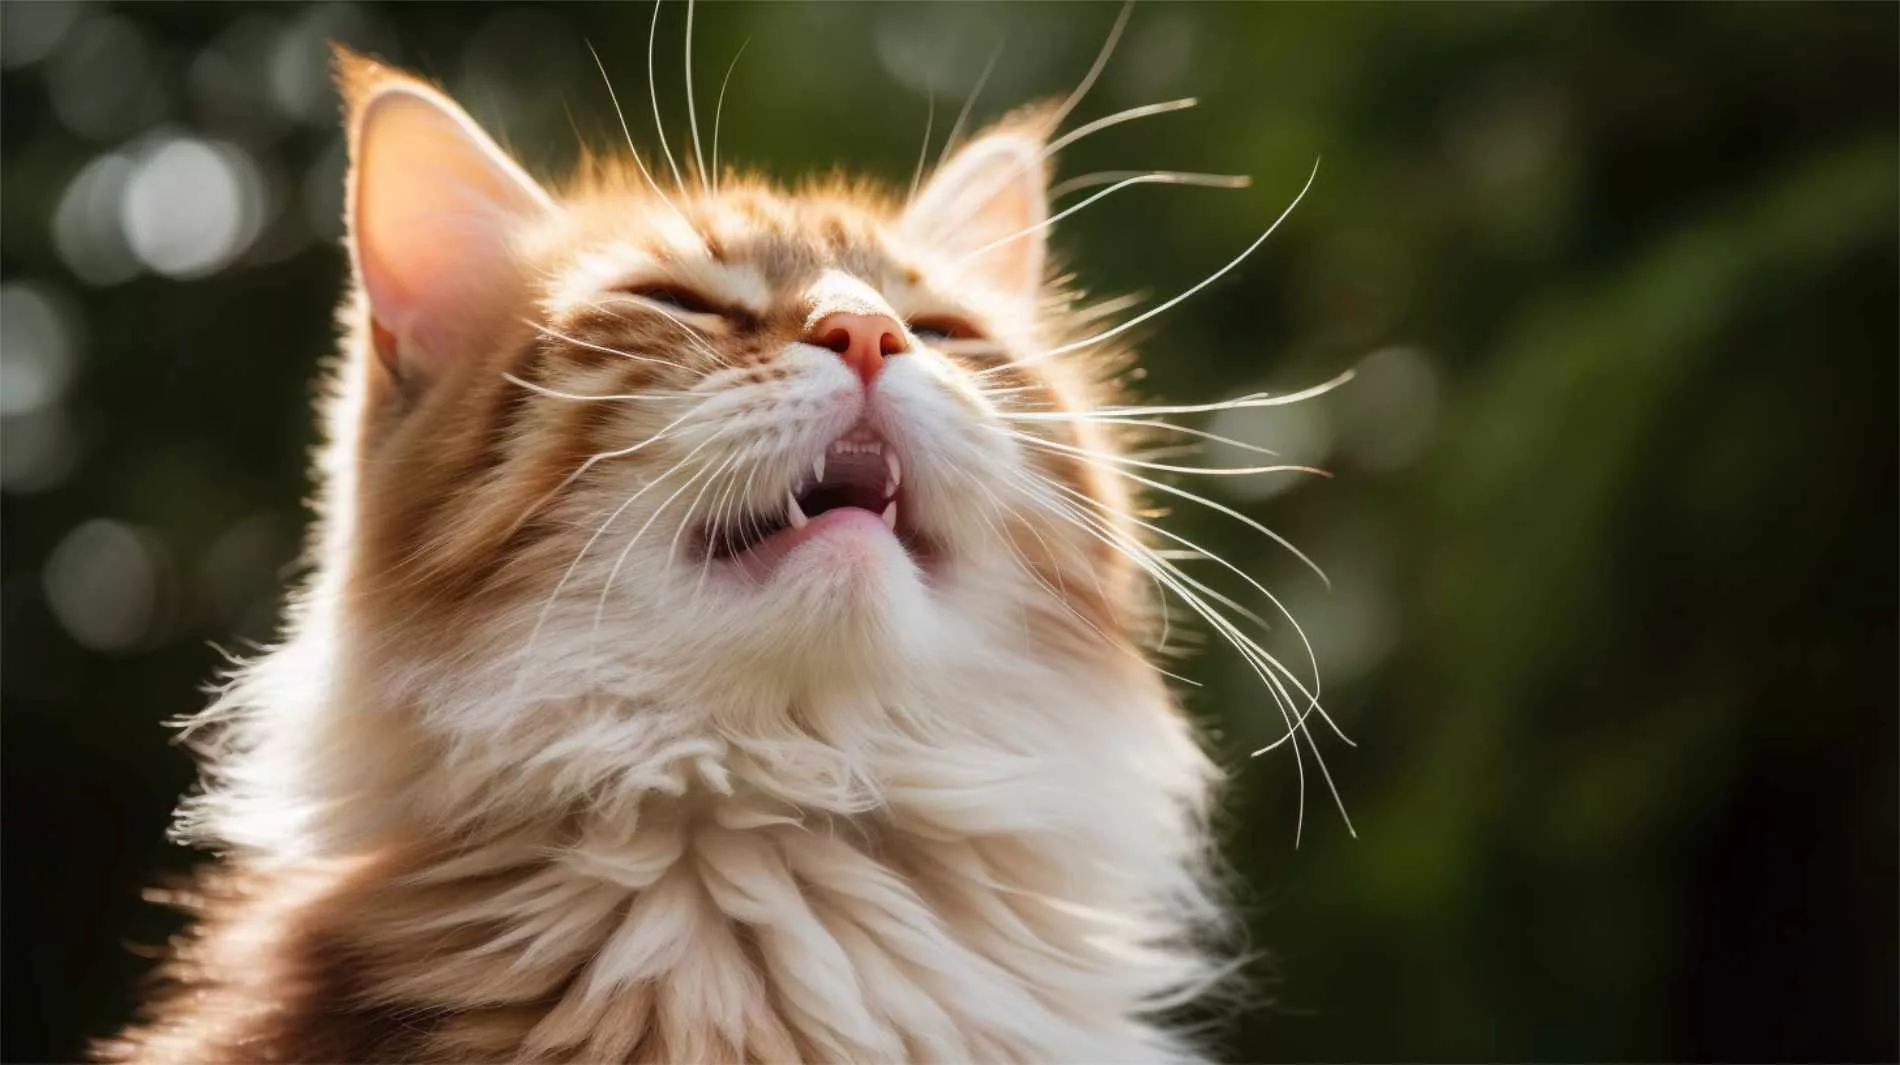 a cat sniffing the air with open mouth, using her jacobson's (vomeronasal) organ